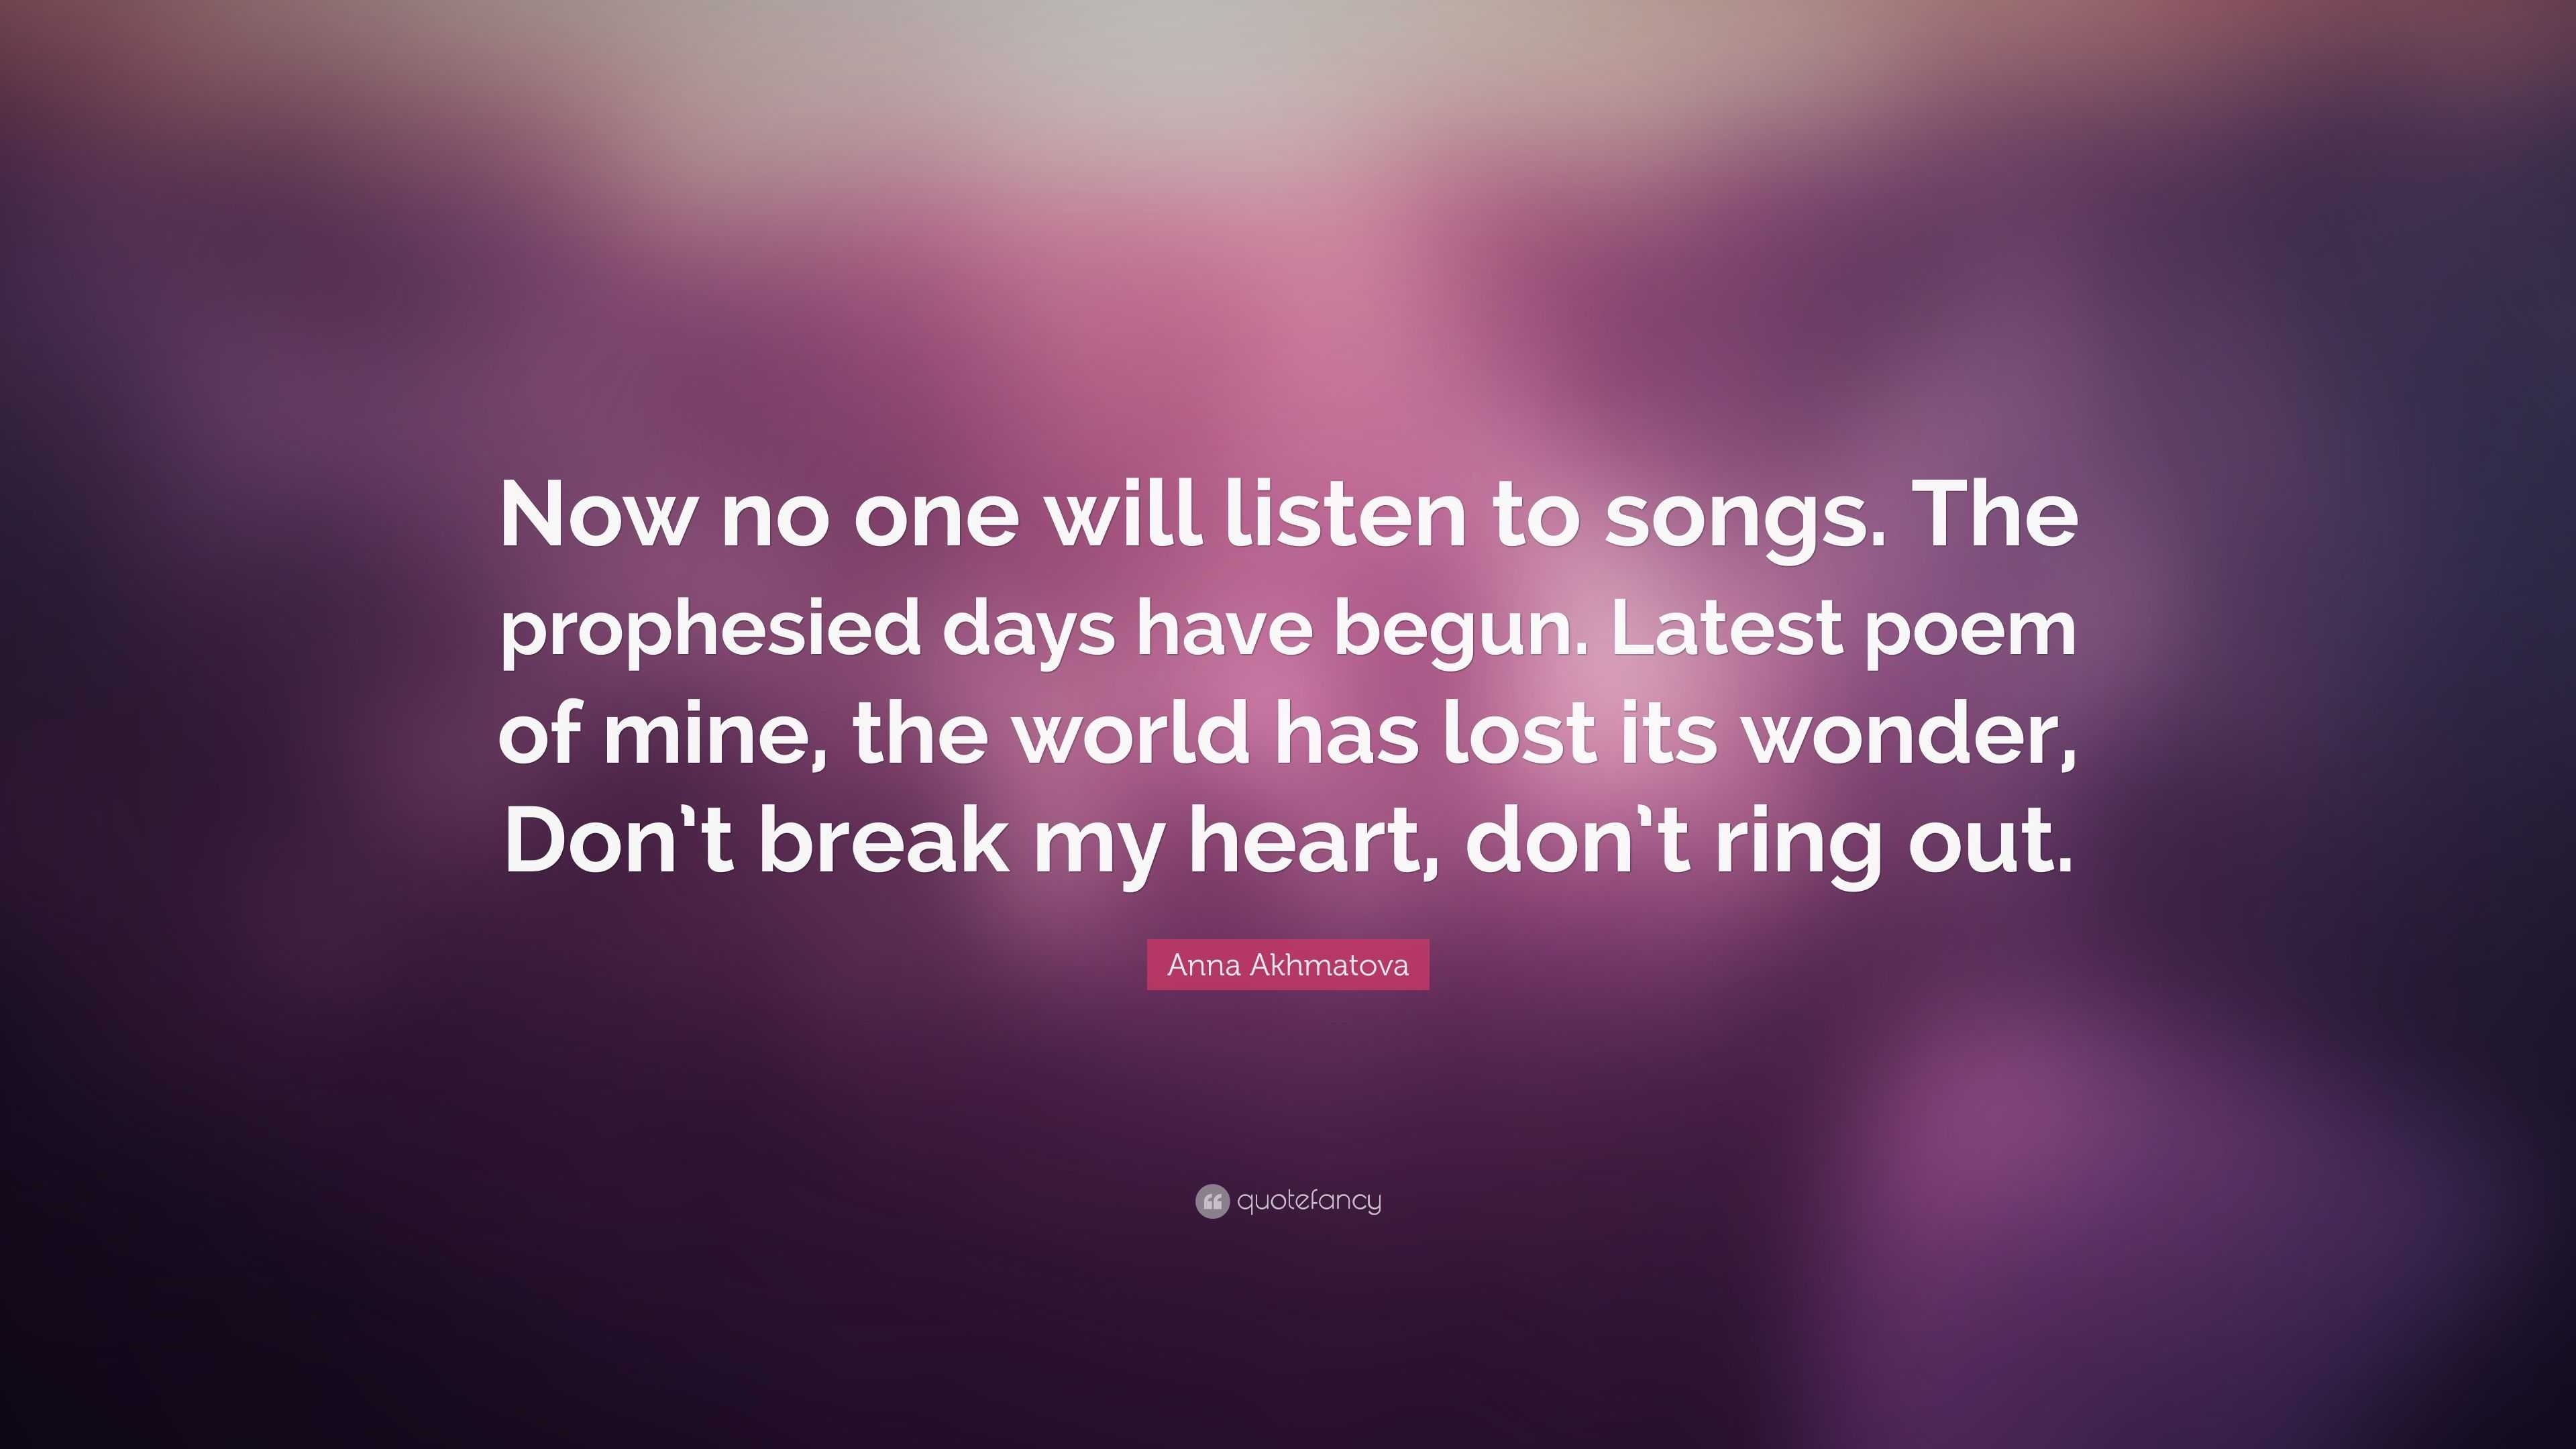 music mends the heart quote